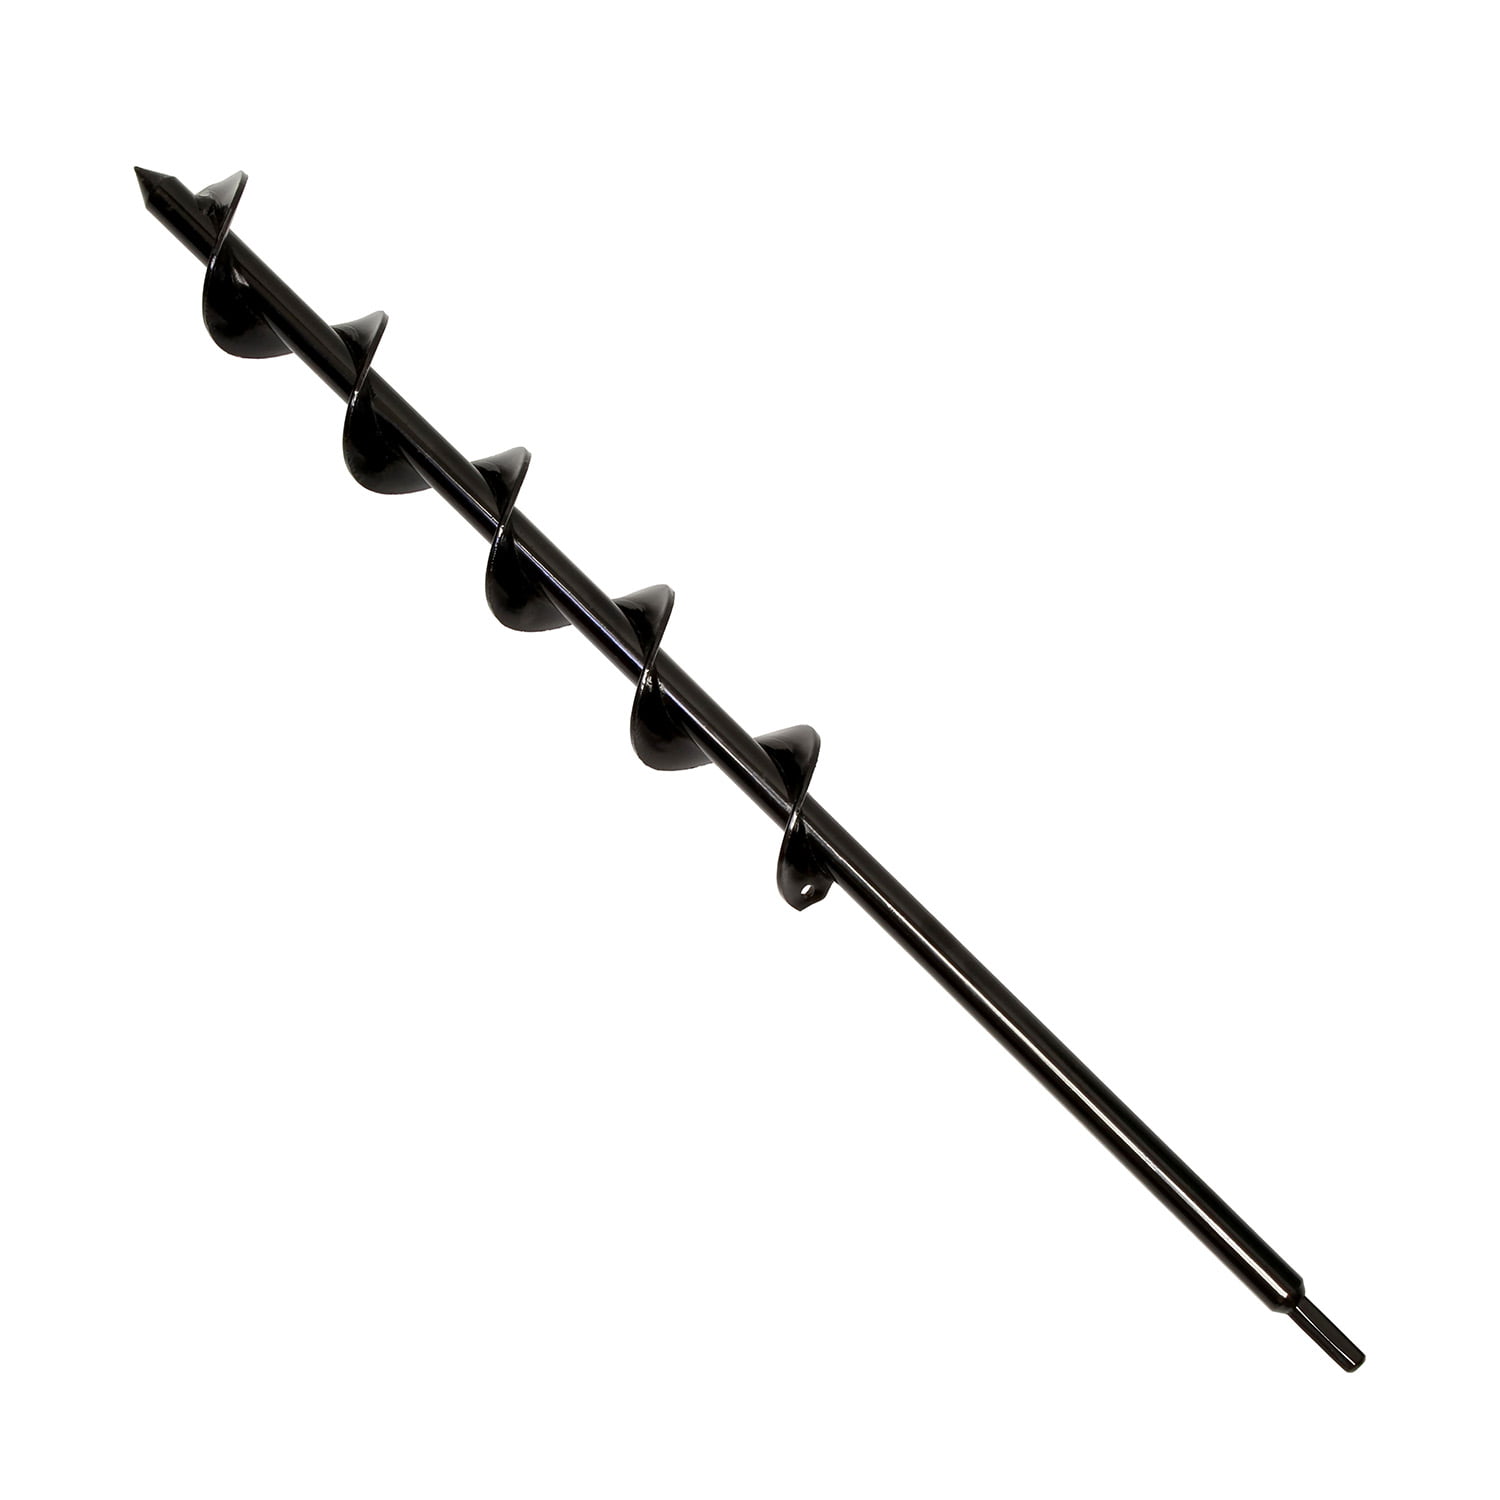 Auger Drill Bit 3x7inch Garden Solid Barrel Dual-Blades Plant Flower Bulb Auger Spiral Hole Drill Rapid Planter Earth Post Umbrella Hole Digger for Most 3/8 Hex Drive 